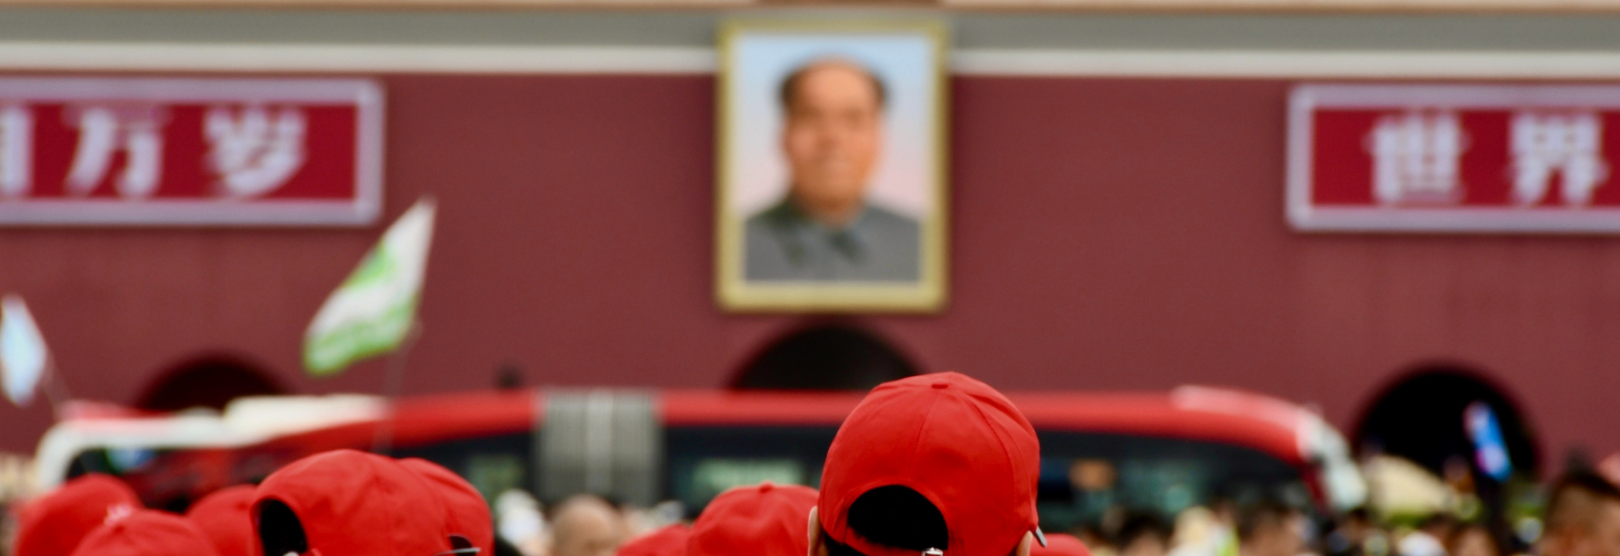 Mao's portrait over the entrance of the Forbidden City in Beijing, China